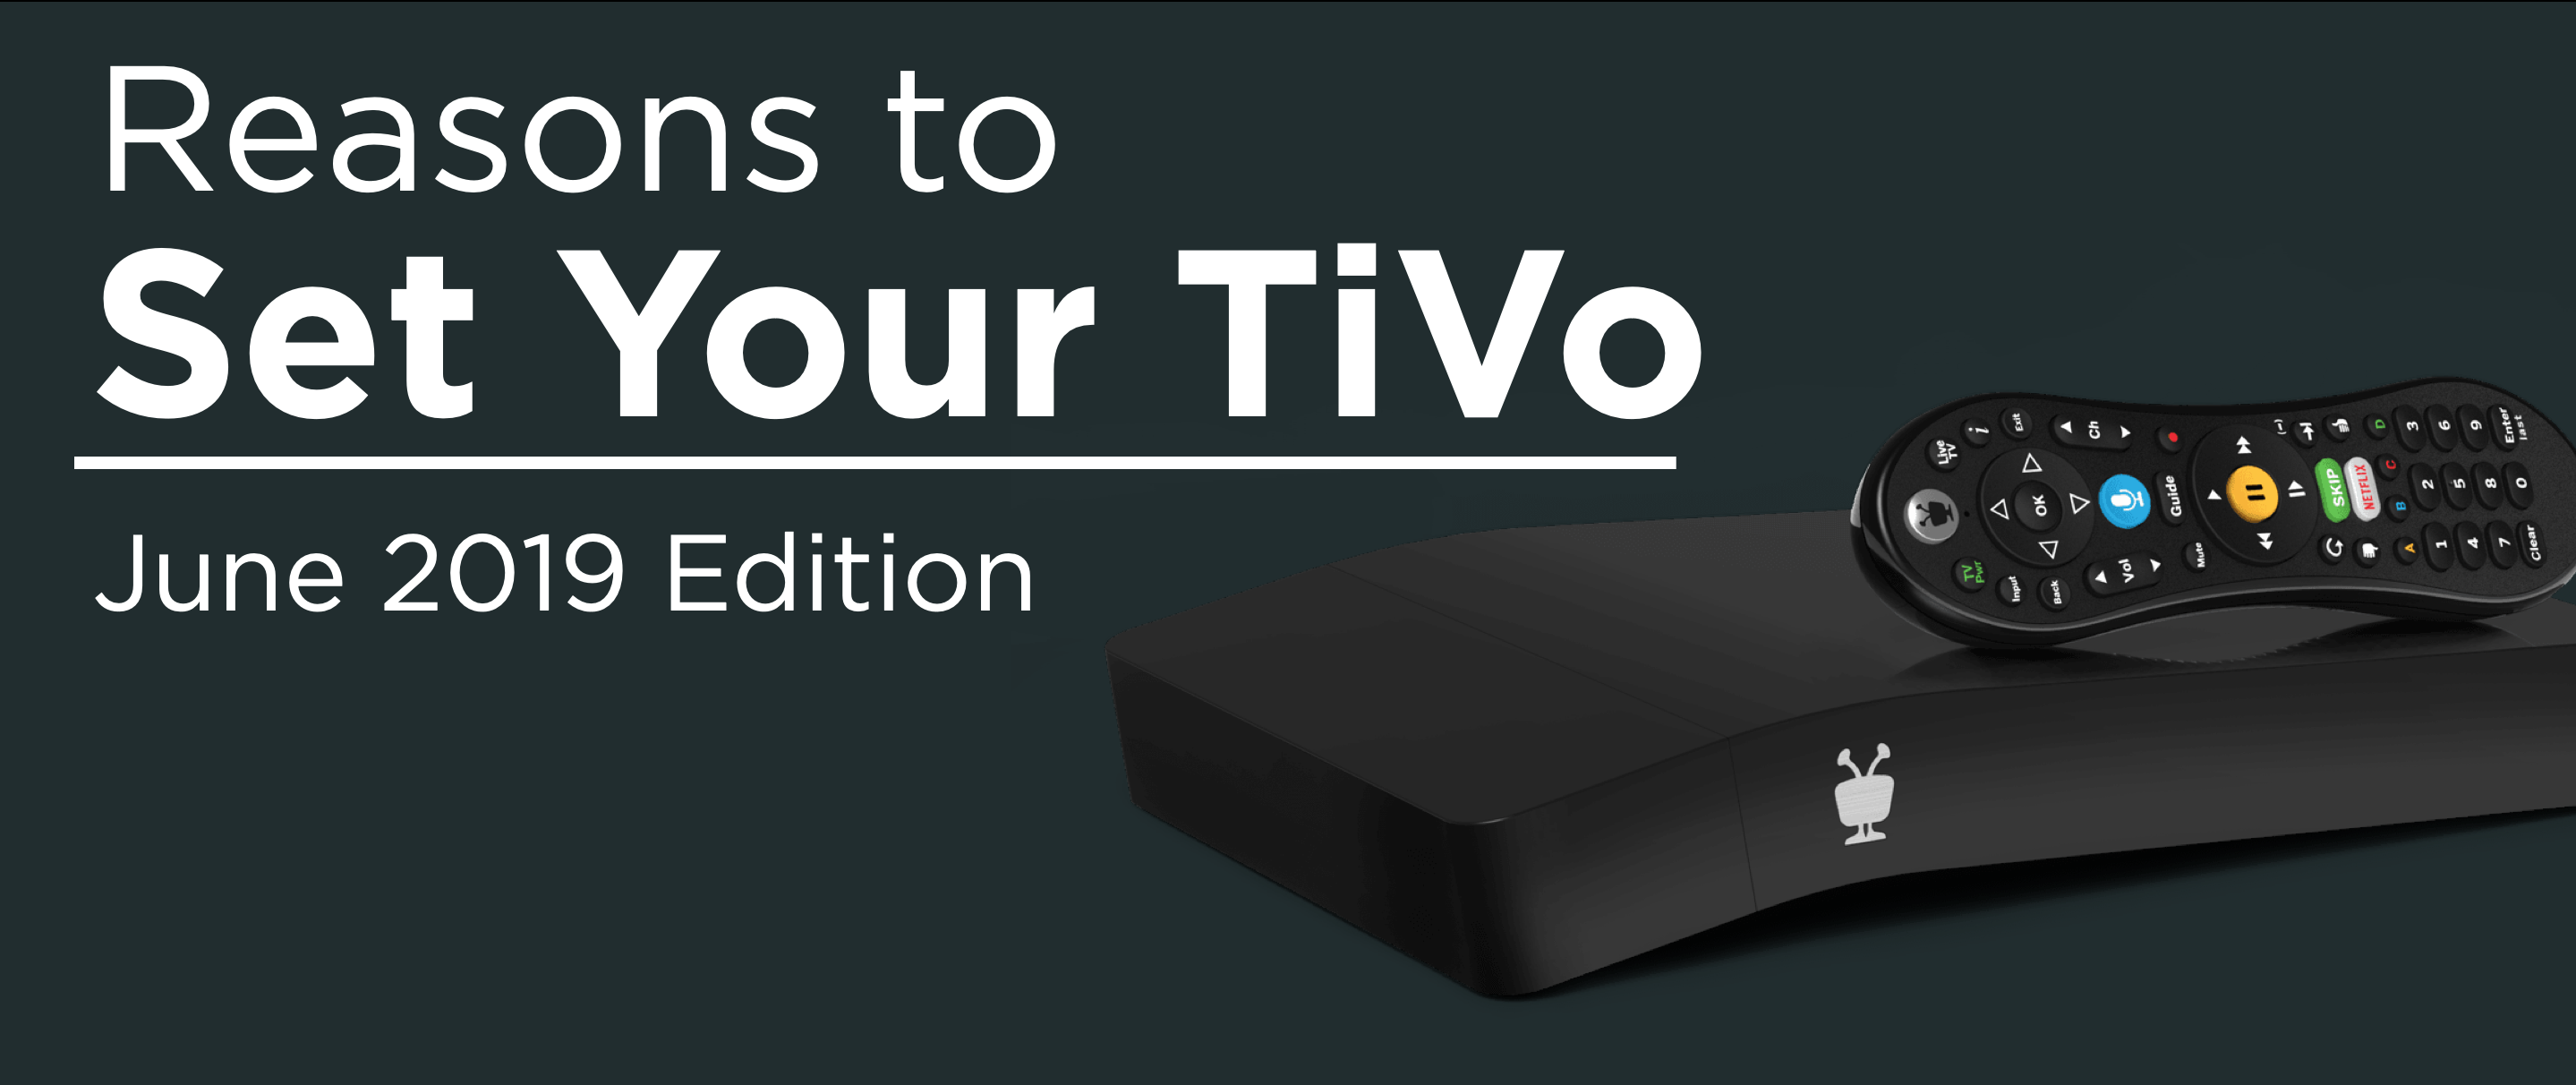 Reasons To Set Your Tivo Hot Tv Shows This Week June 22 30 2019